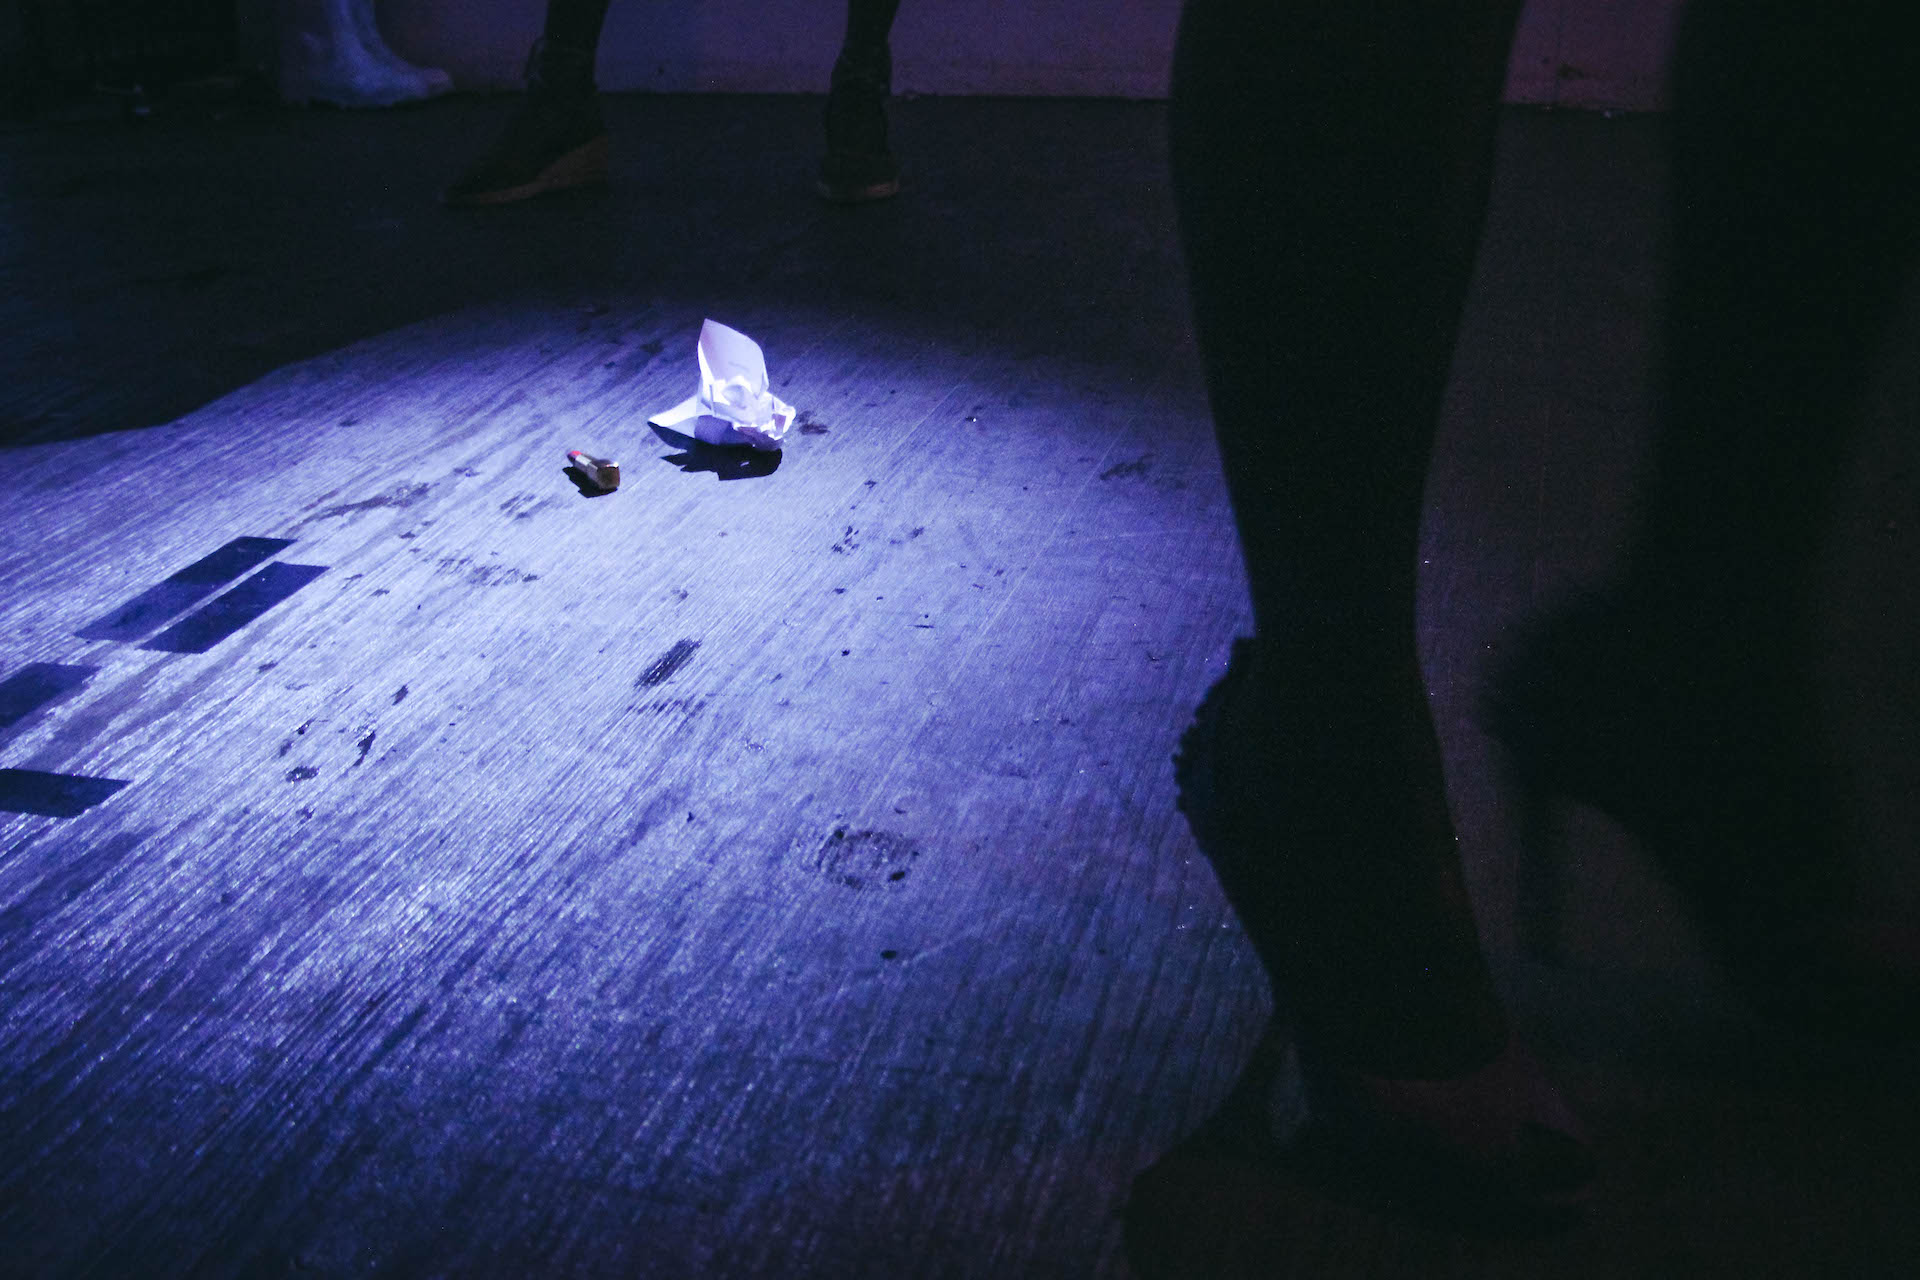 Zoom in to the floor in a dark blue lighted room. There is a silhouette of a performer's legs with high heels. On the floor there lies a lipstick and a crumpled piece of paper.